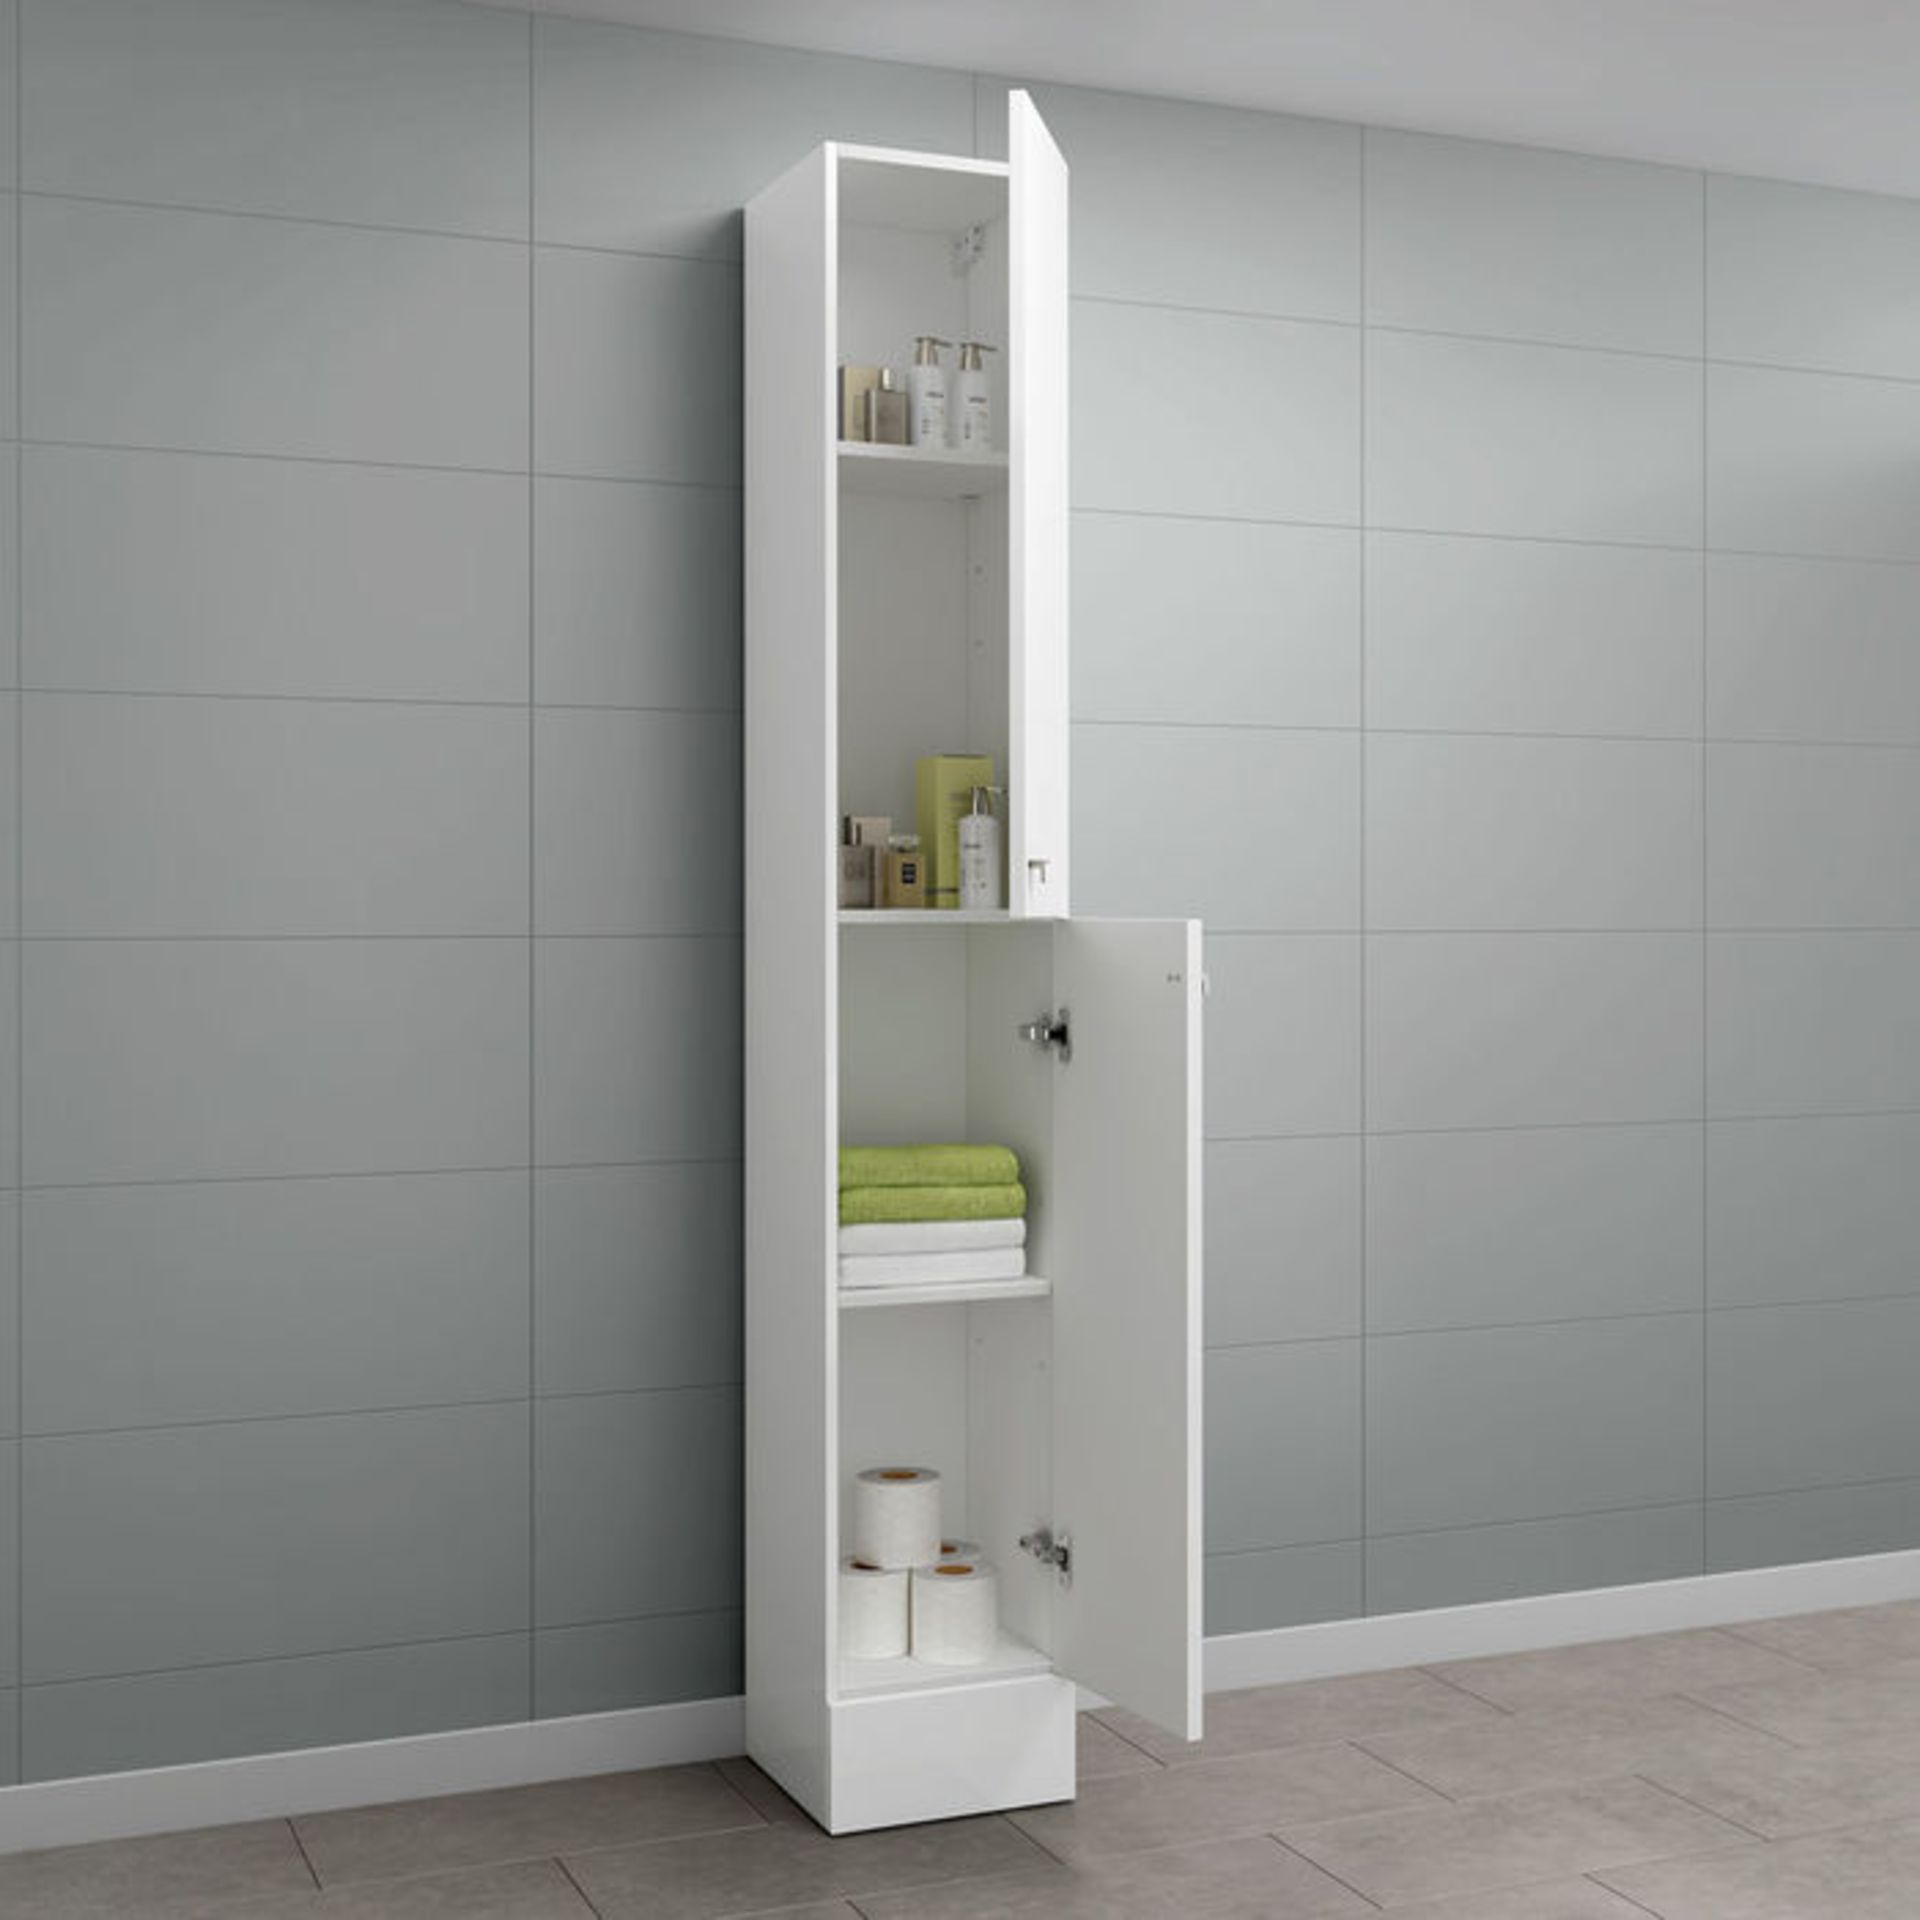 (GR172) 1900x300mm Harper Gloss White Tall Storage Cabinet - Floor Standing. Our tall unit offers - Image 3 of 3